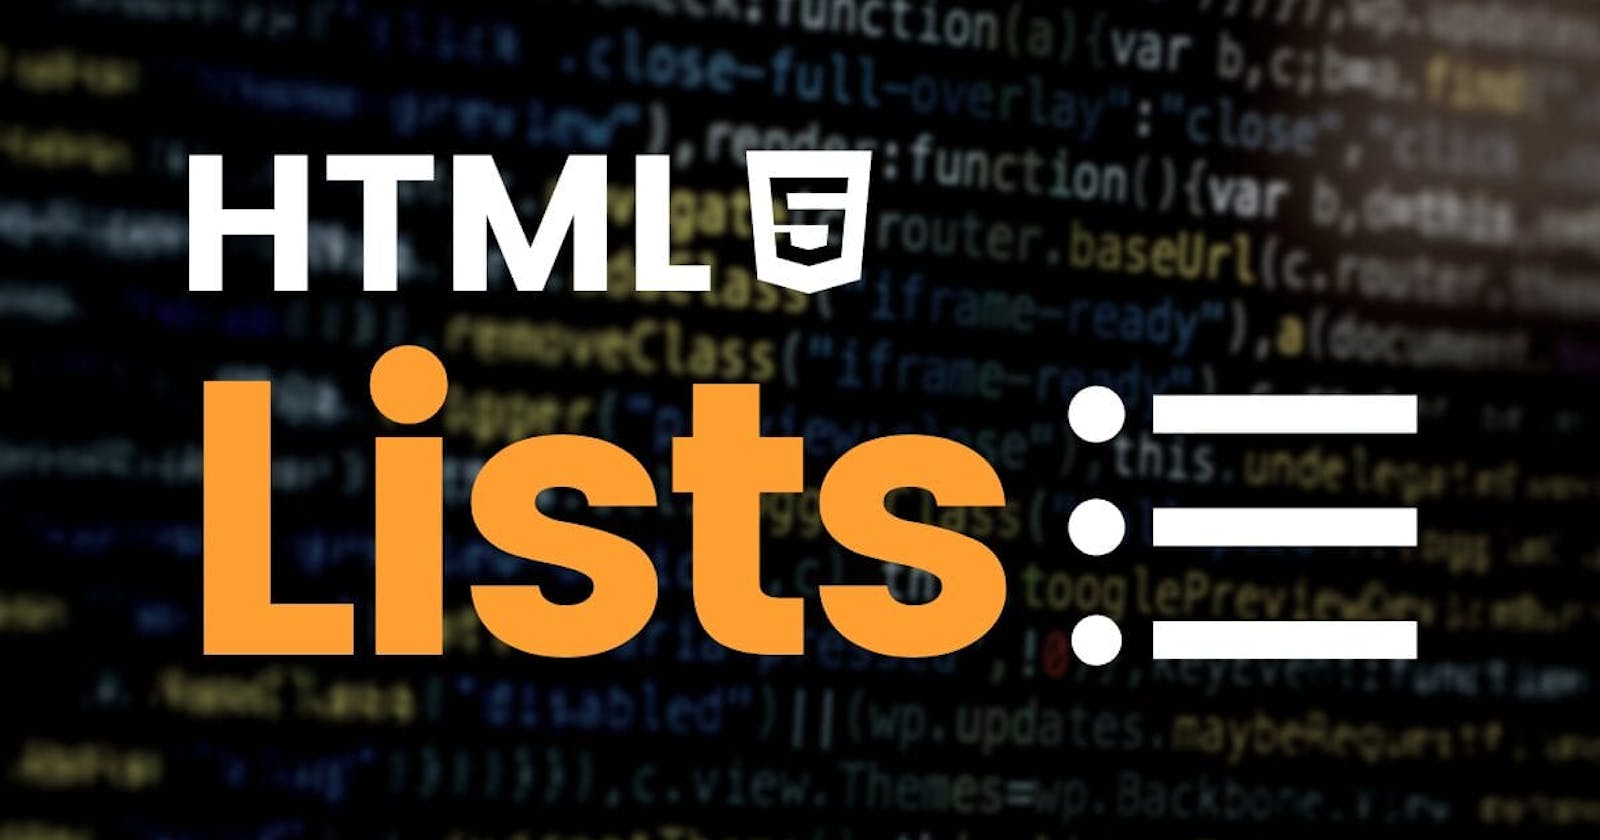 Different Types of HTML lists Explained with Examples